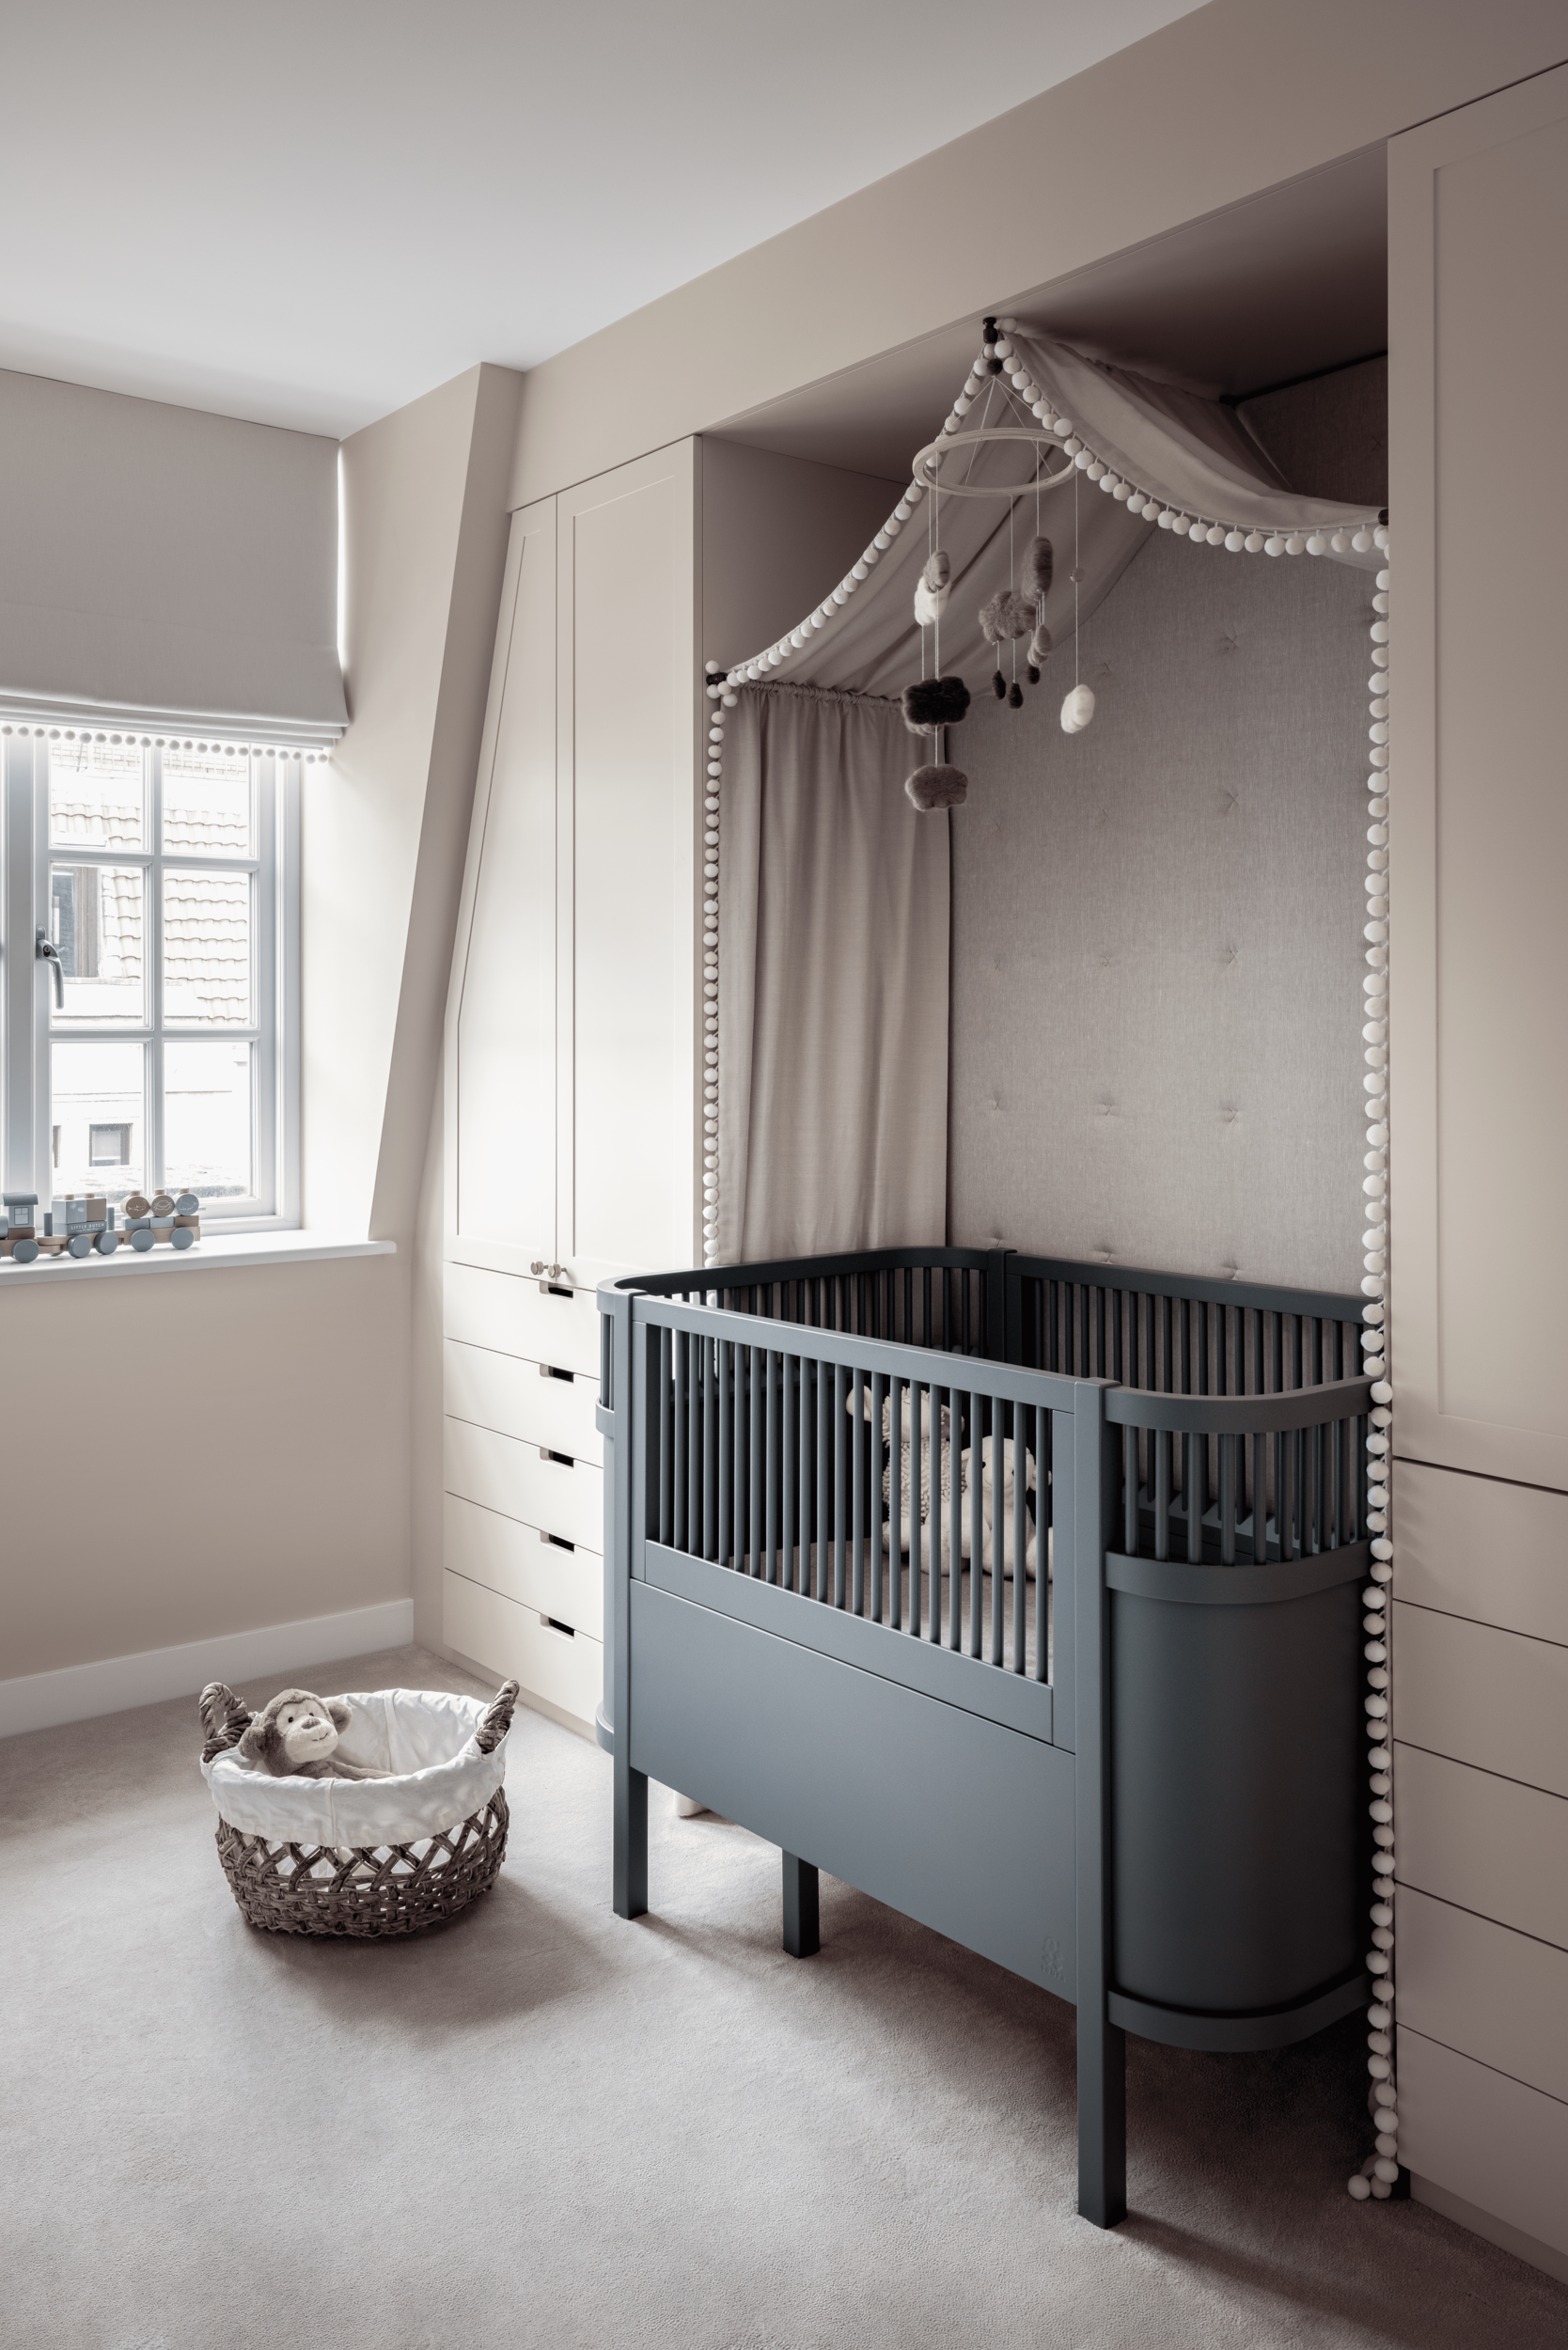 Baby cot with canopy above